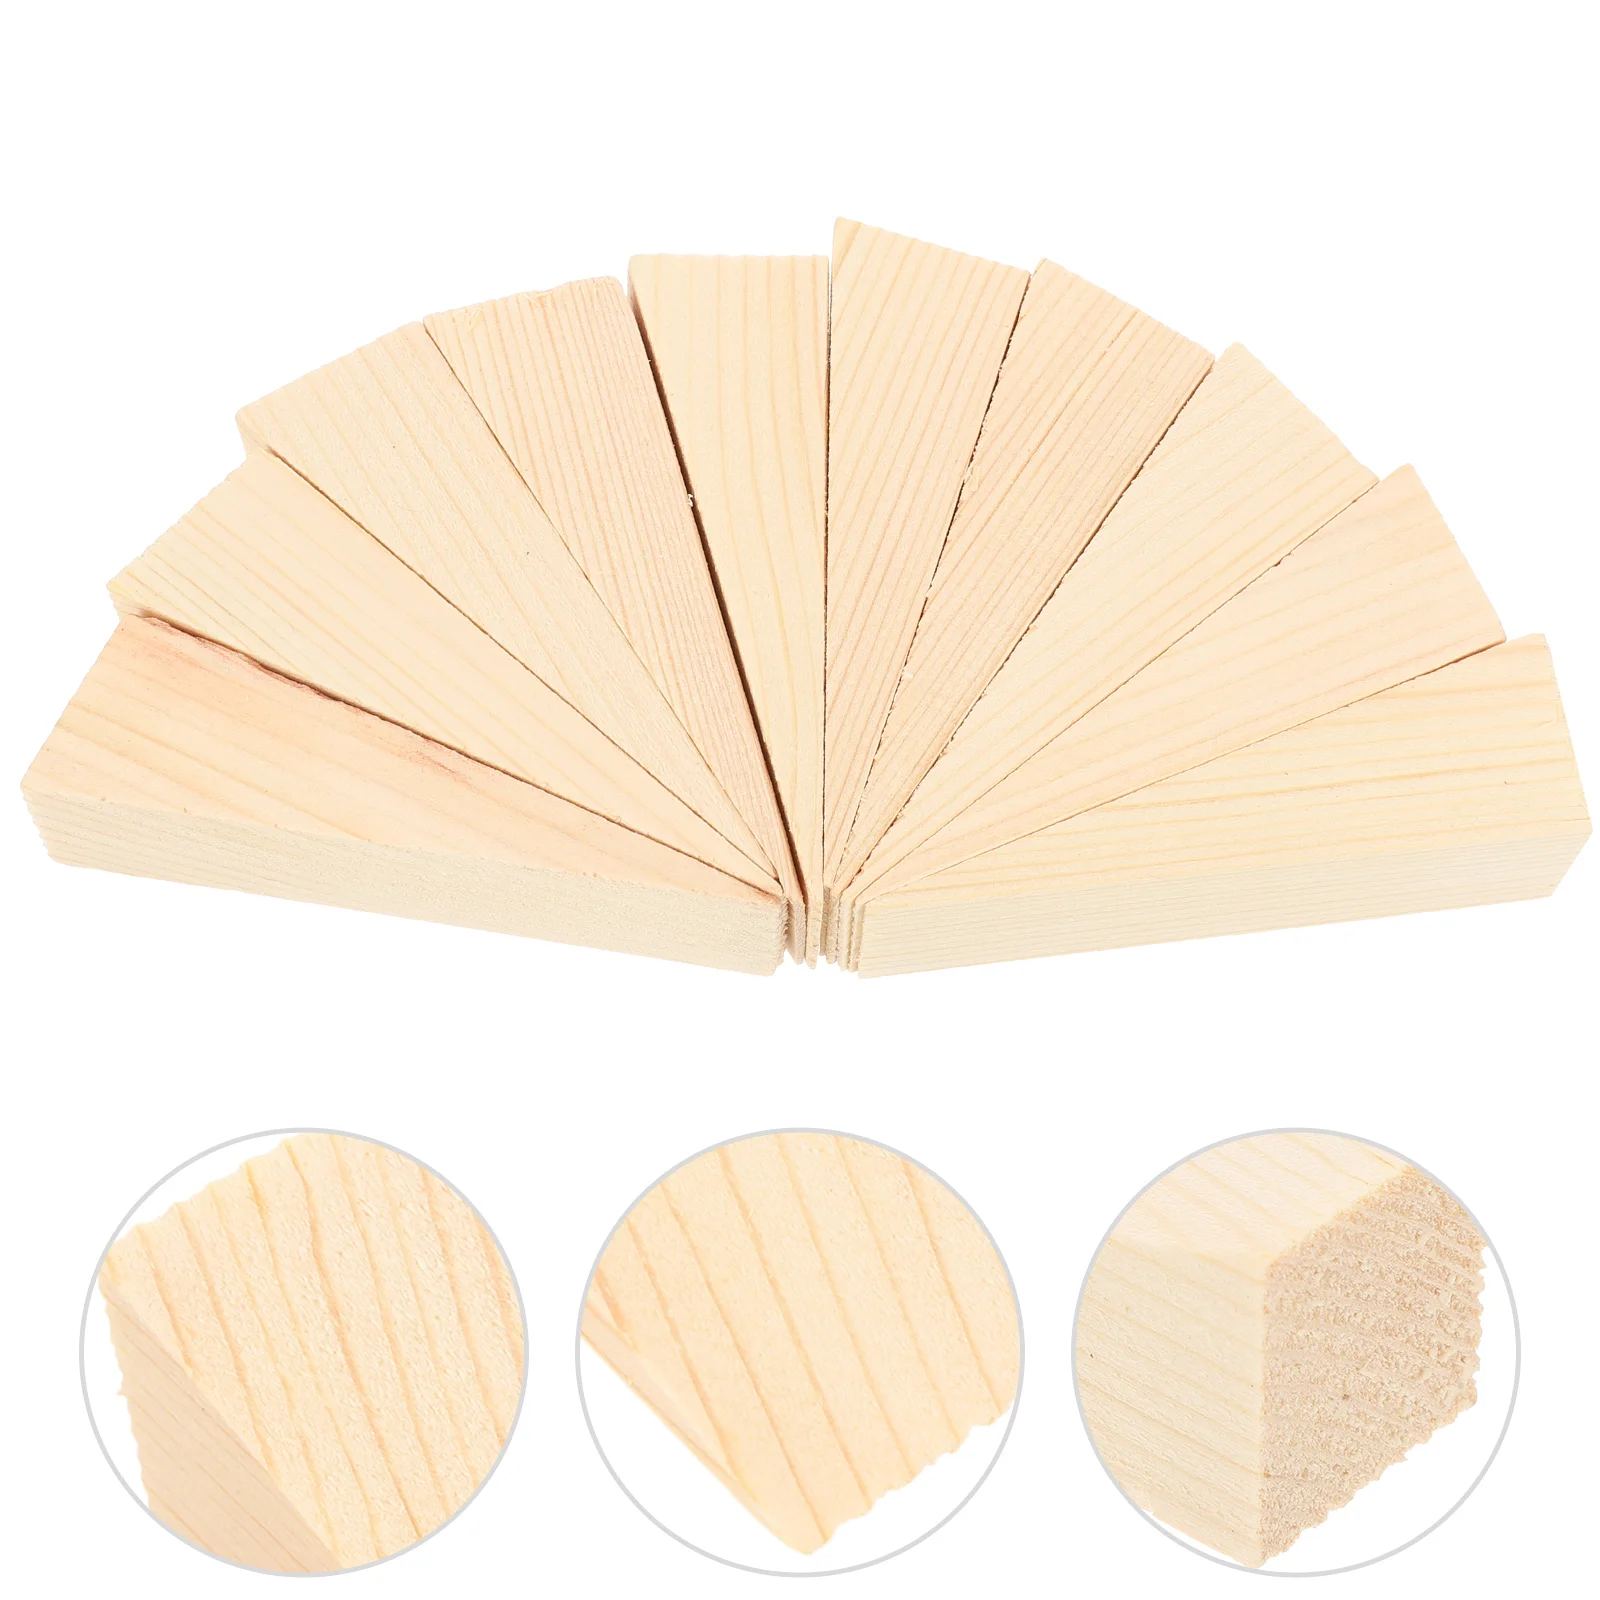 

10 Pcs Triangular Wooden Wedge Door Stop Adorn Wall Protector Trim Stopper Punch-free Stoppers Nail-free Decor Cribs